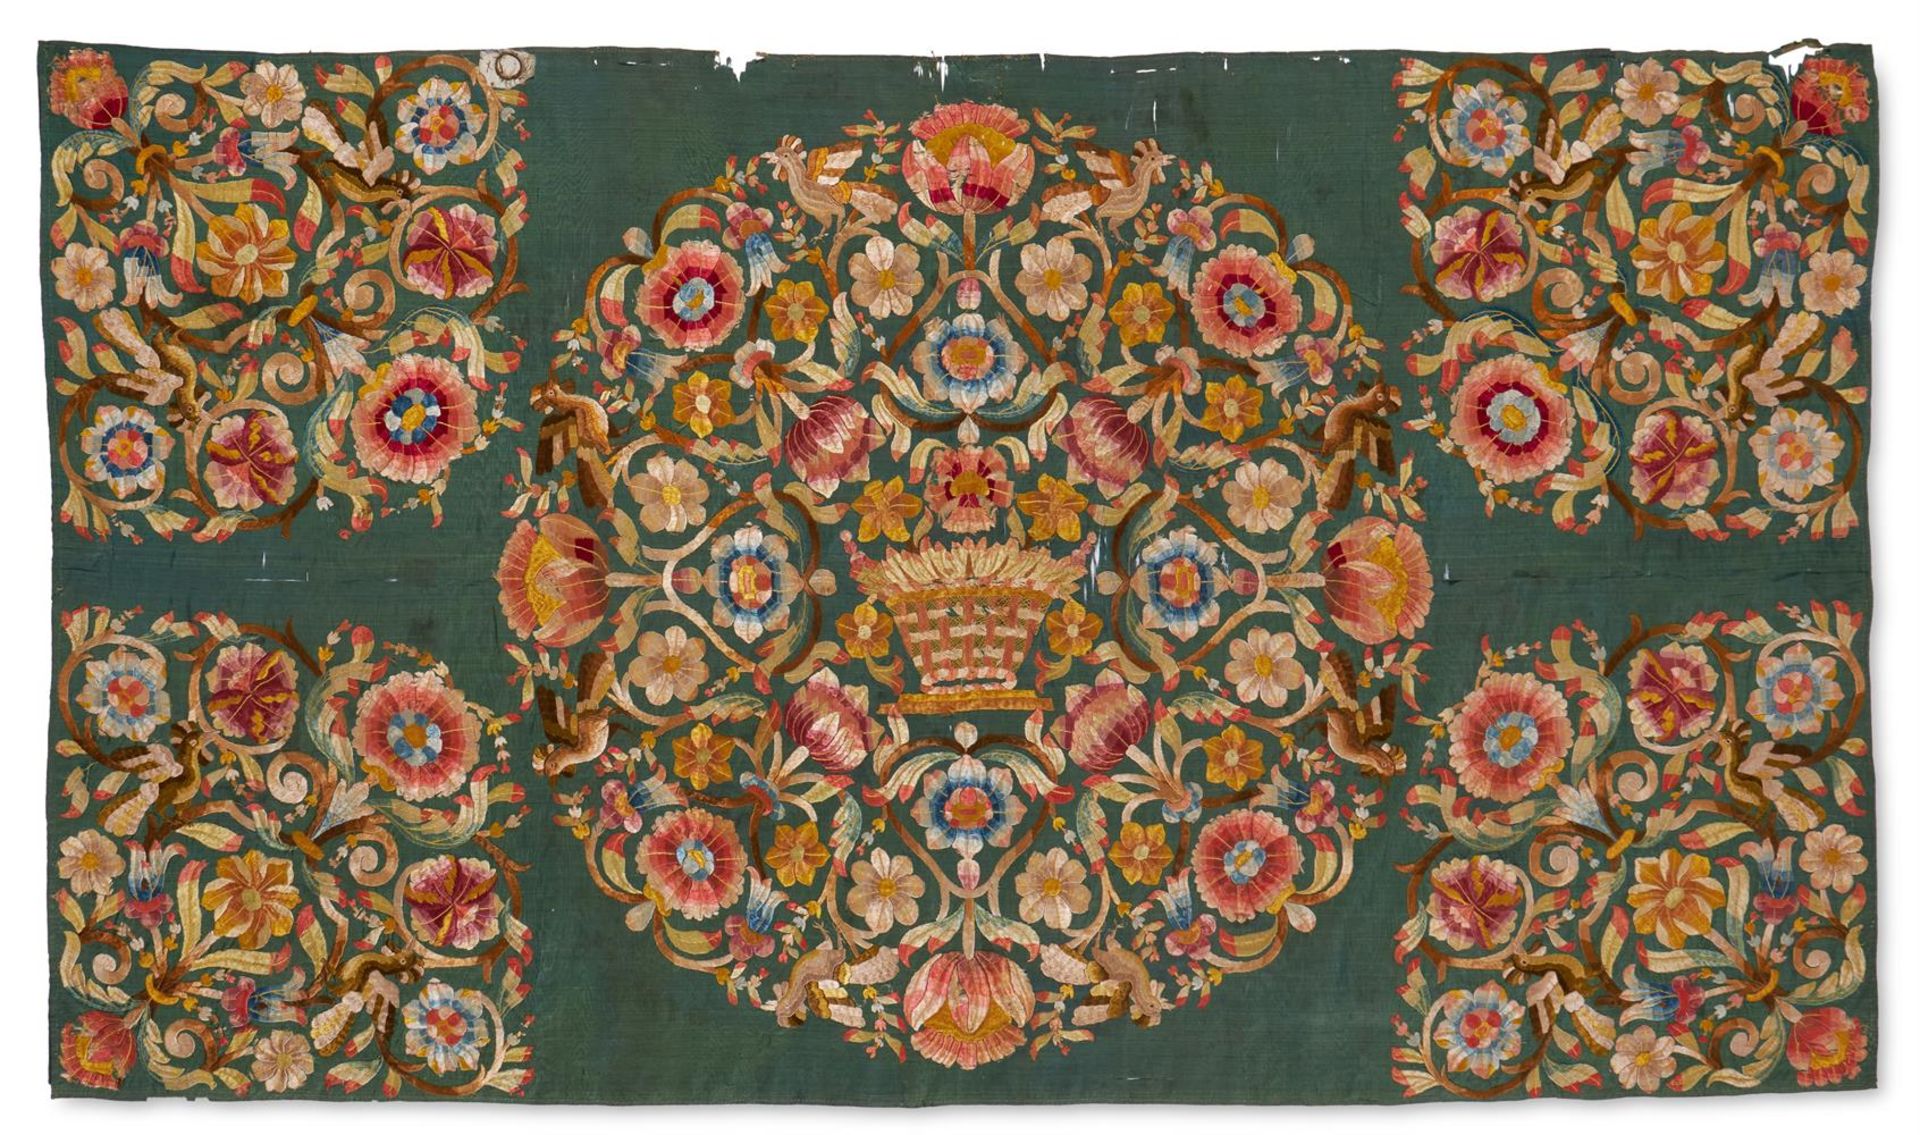 A SOUTHERN EUROPEAN EMBROIDERED SILK PANEL ITALIAN OR PORTUGUESE